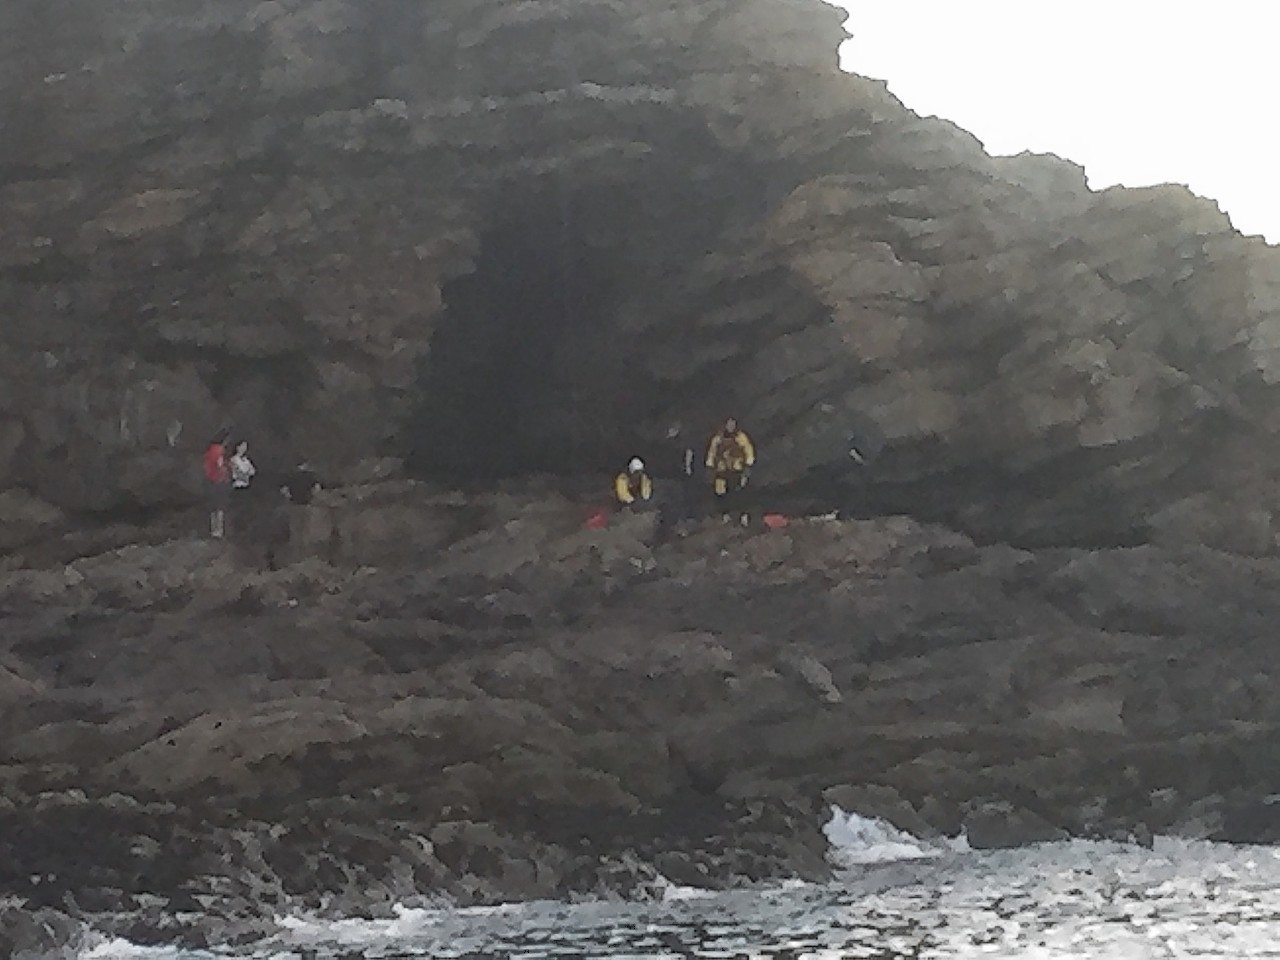 The rescue at cliffs near Newtonhill